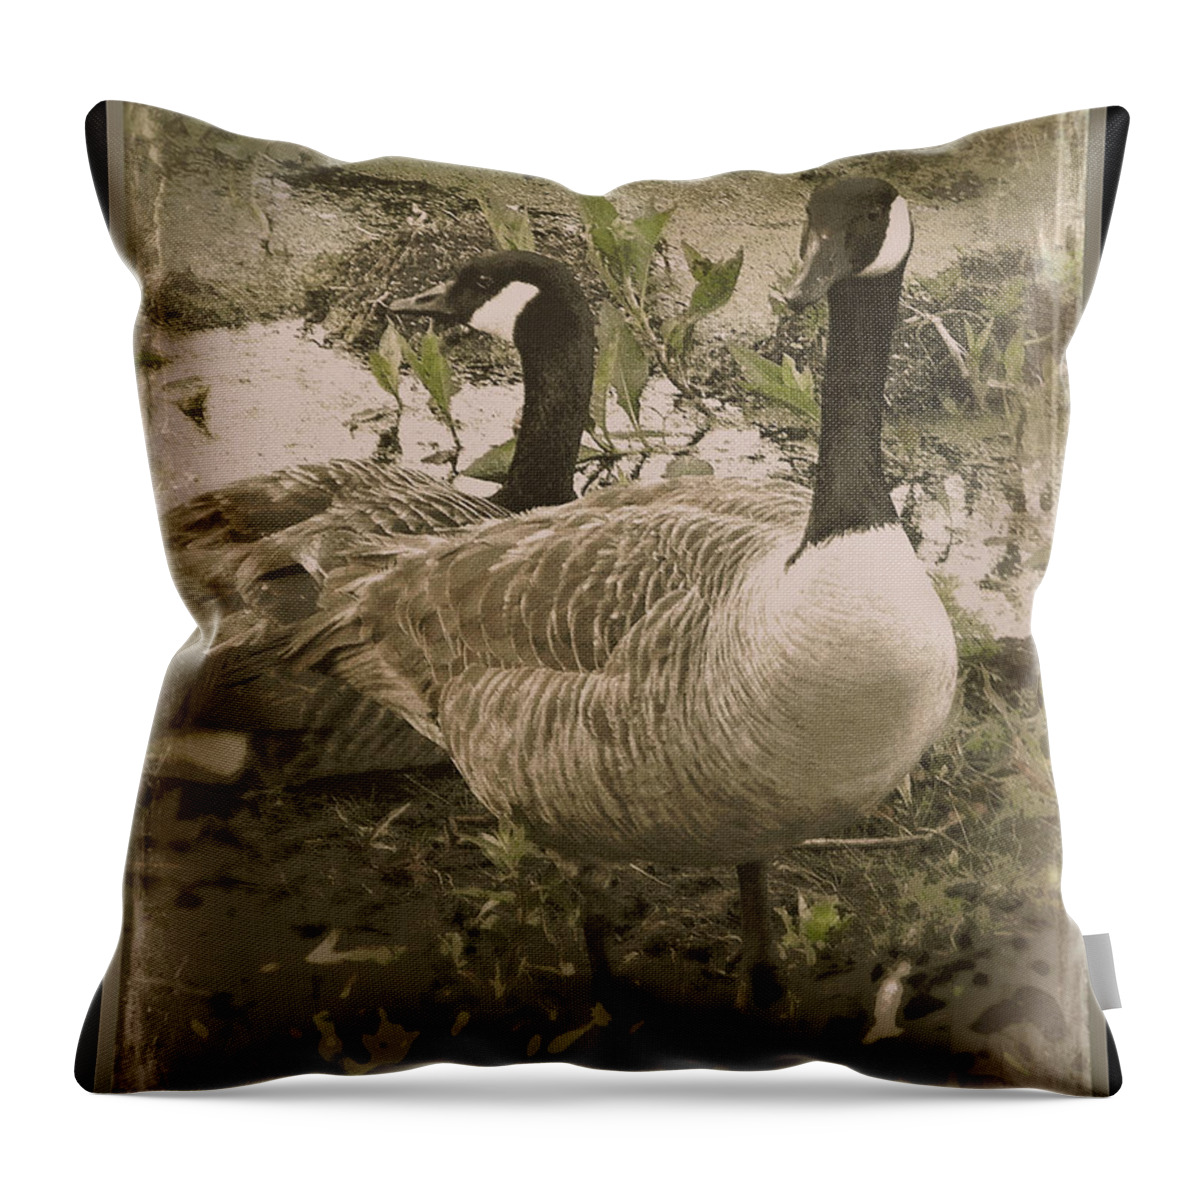 Geese Throw Pillow featuring the photograph Geese by Leslie Revels